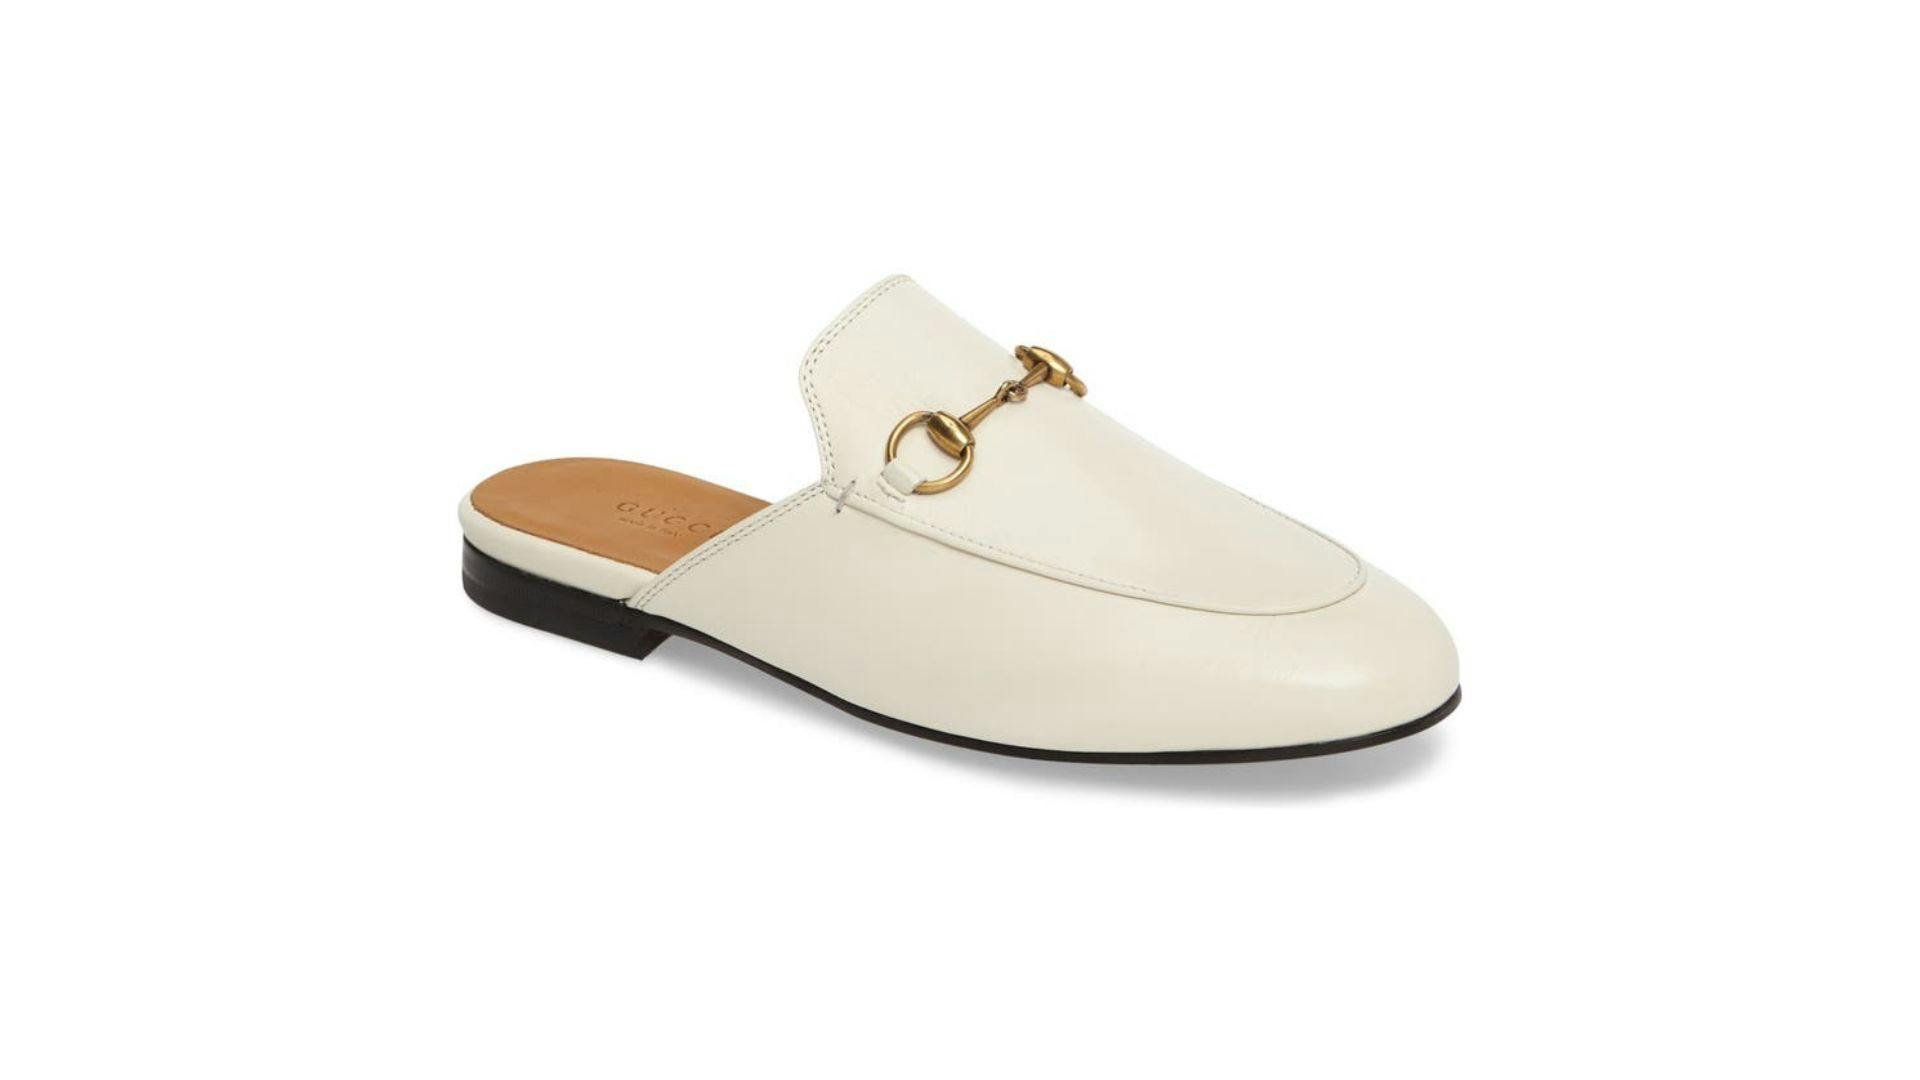 Gucci Princetown Mules is a great chose.